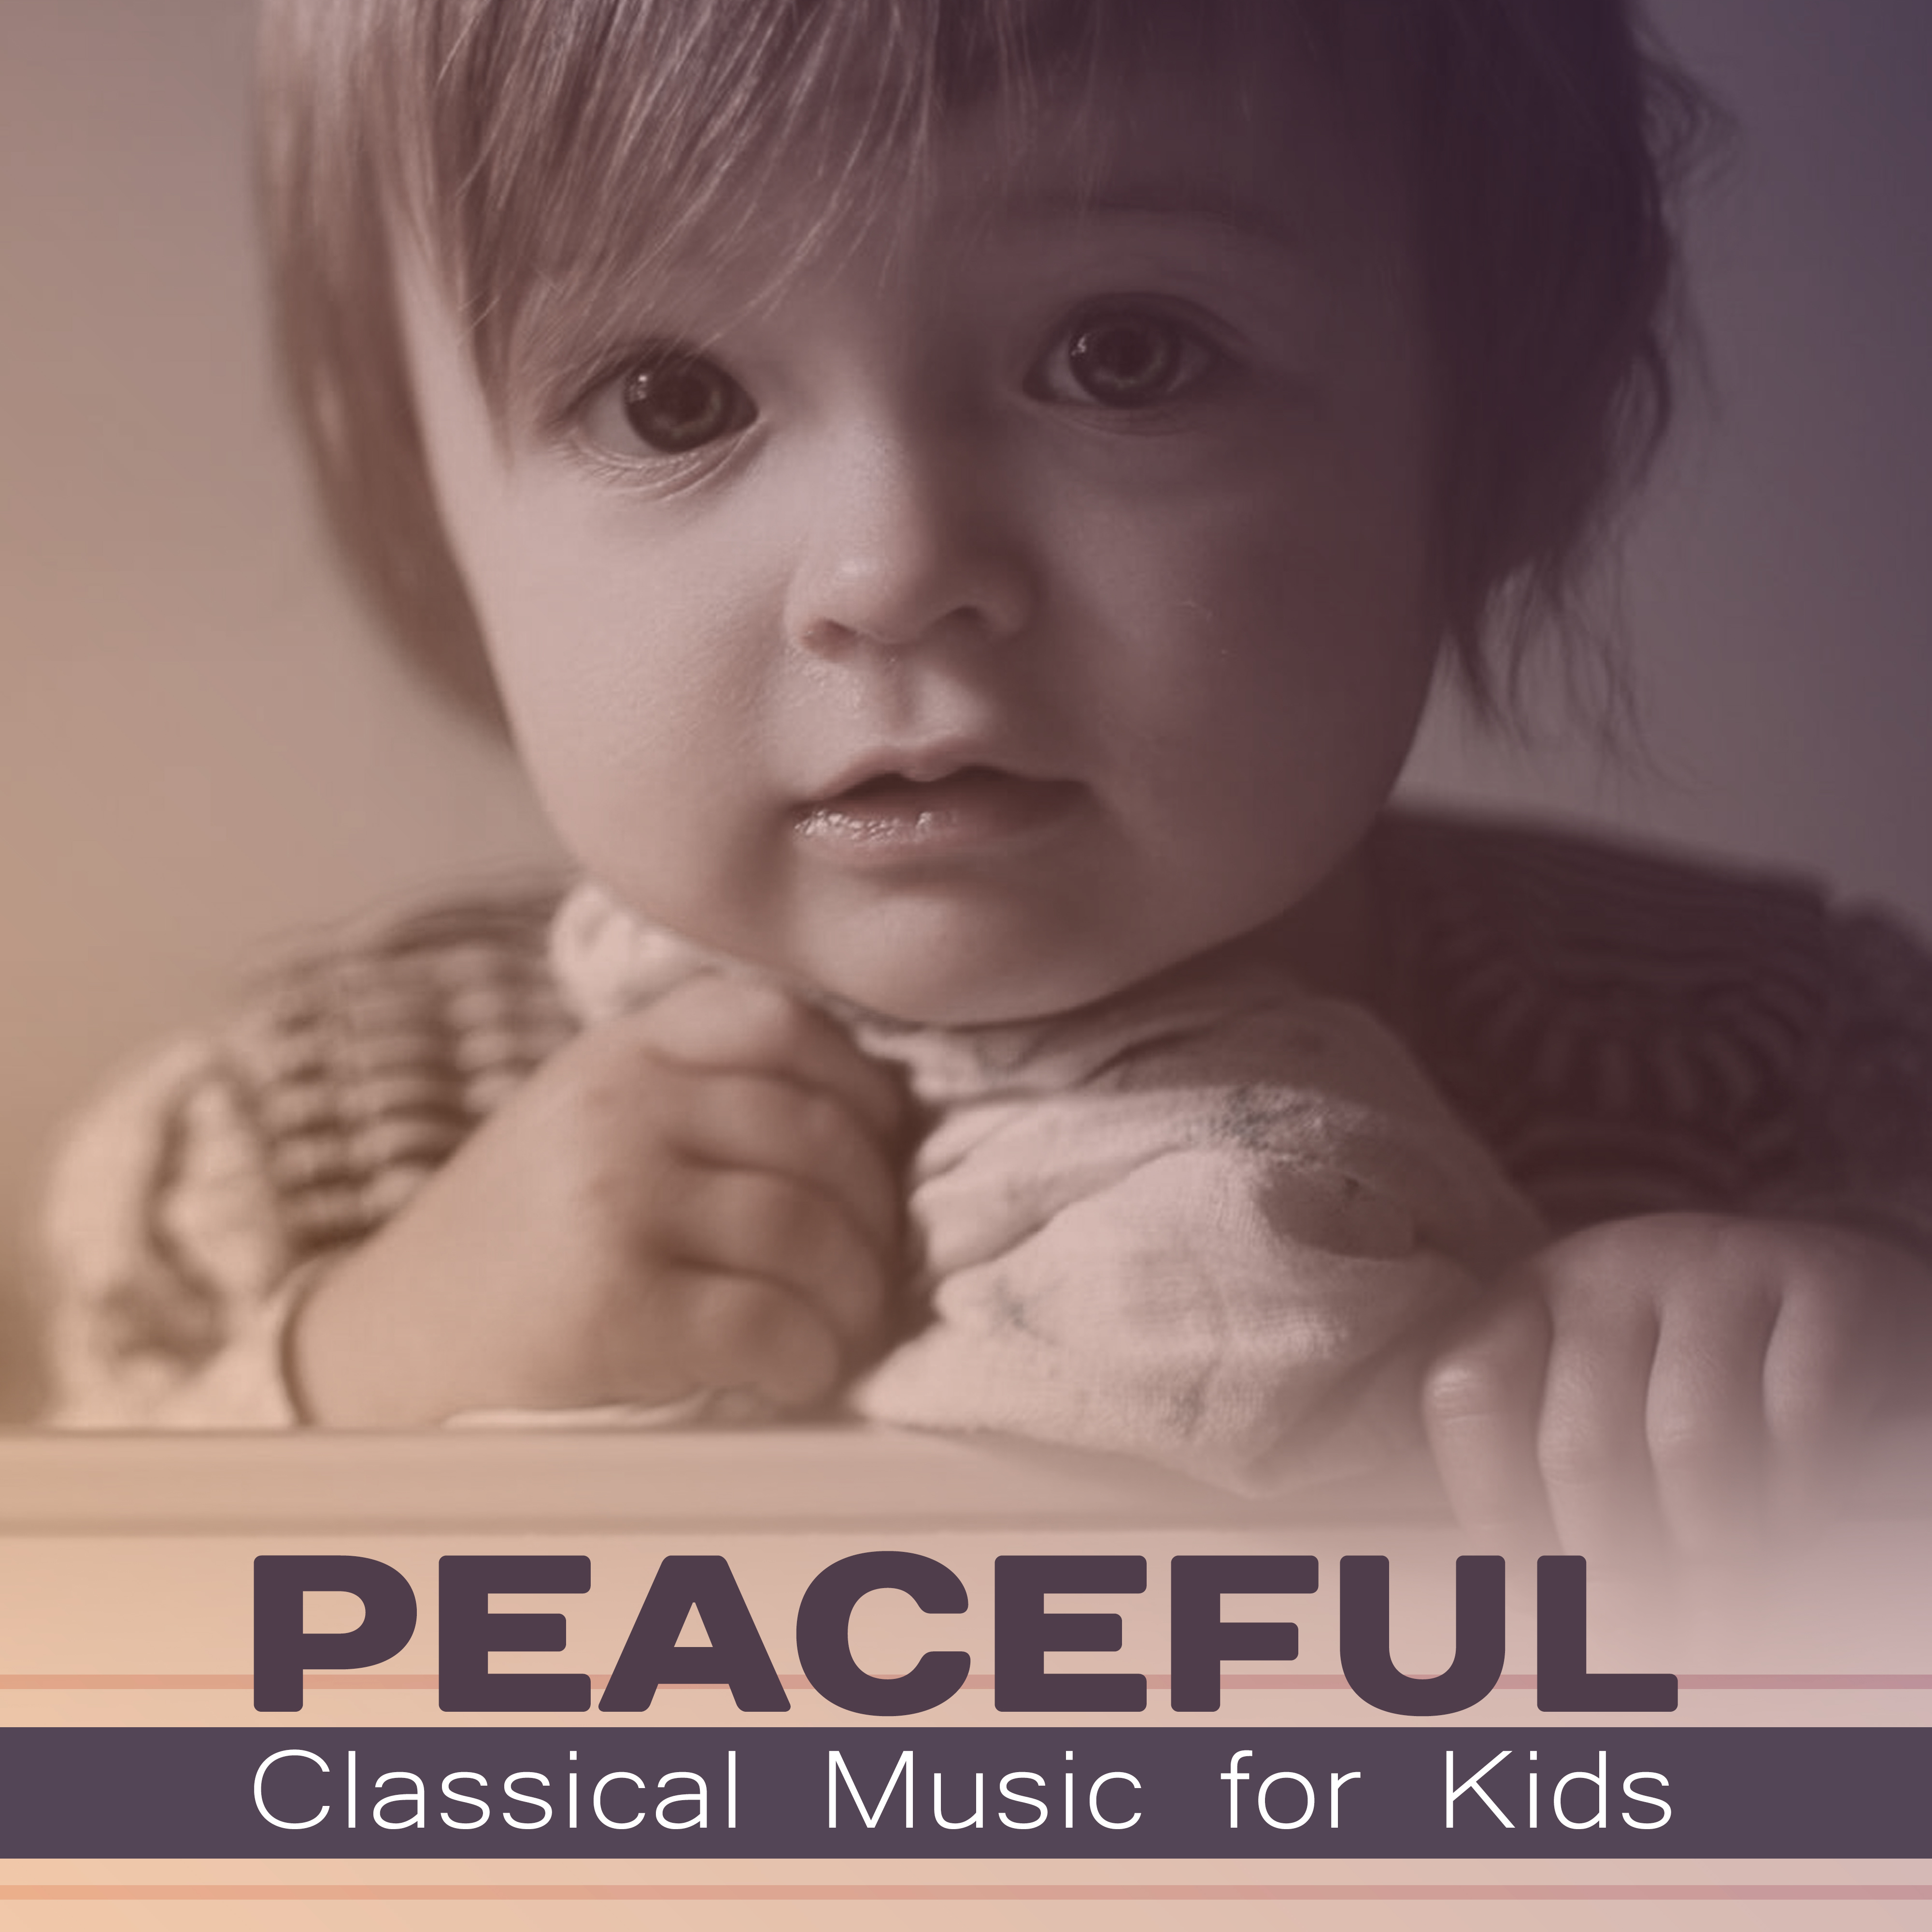 Peaceful Classical Music for Kids  Soothing Sounds for Relaxation, Healing Lullabies, Ambient Dream, Satie, Schubert